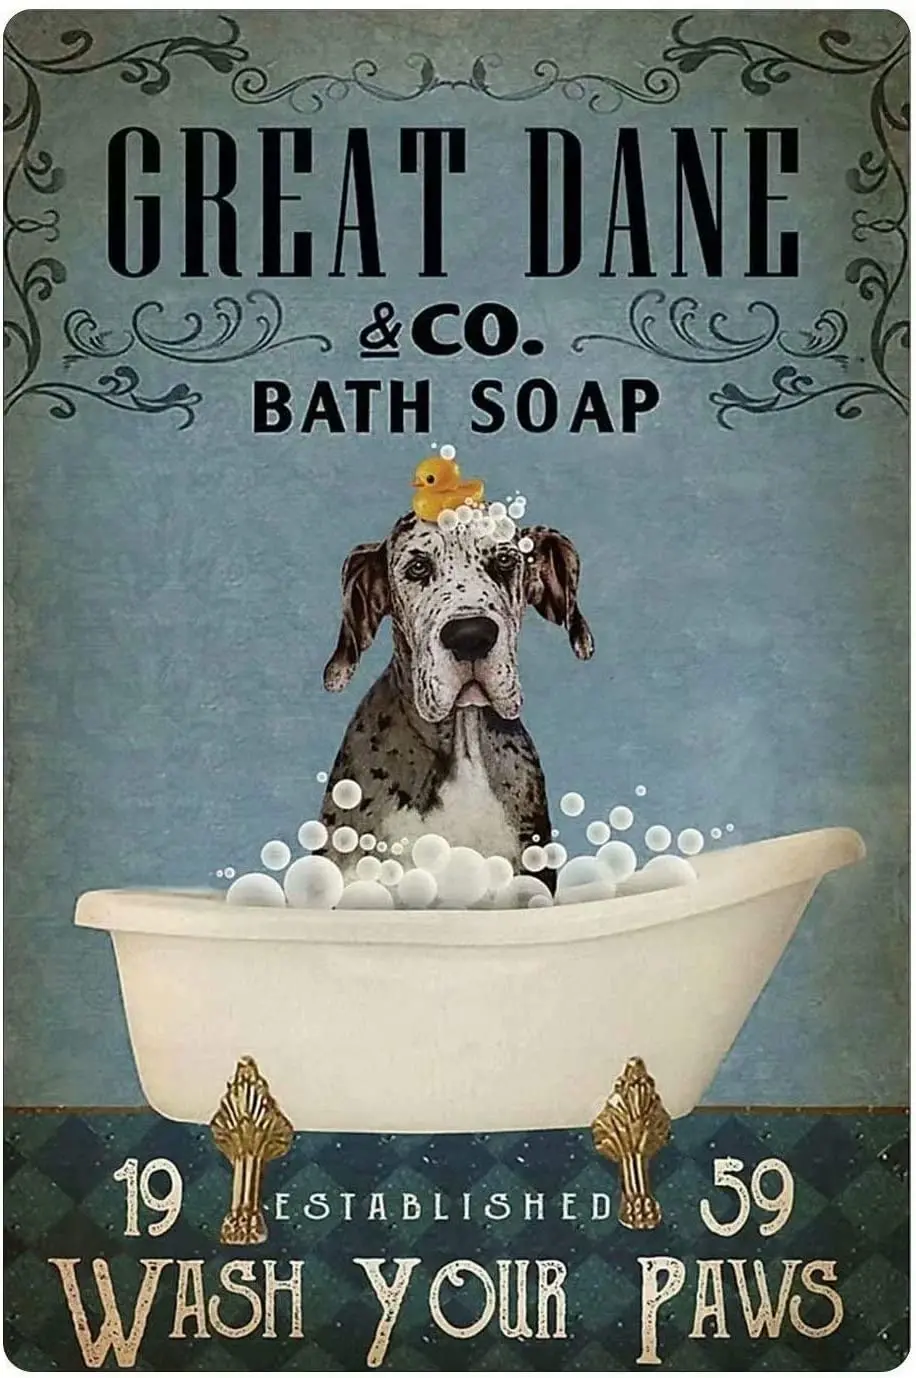 

GJHGHJ Great Dane Dog Metal Poster Great Dane Co. Bath Soap Wash Your Paws Tin Signs Cafe Living Room Home Art Wall Decor